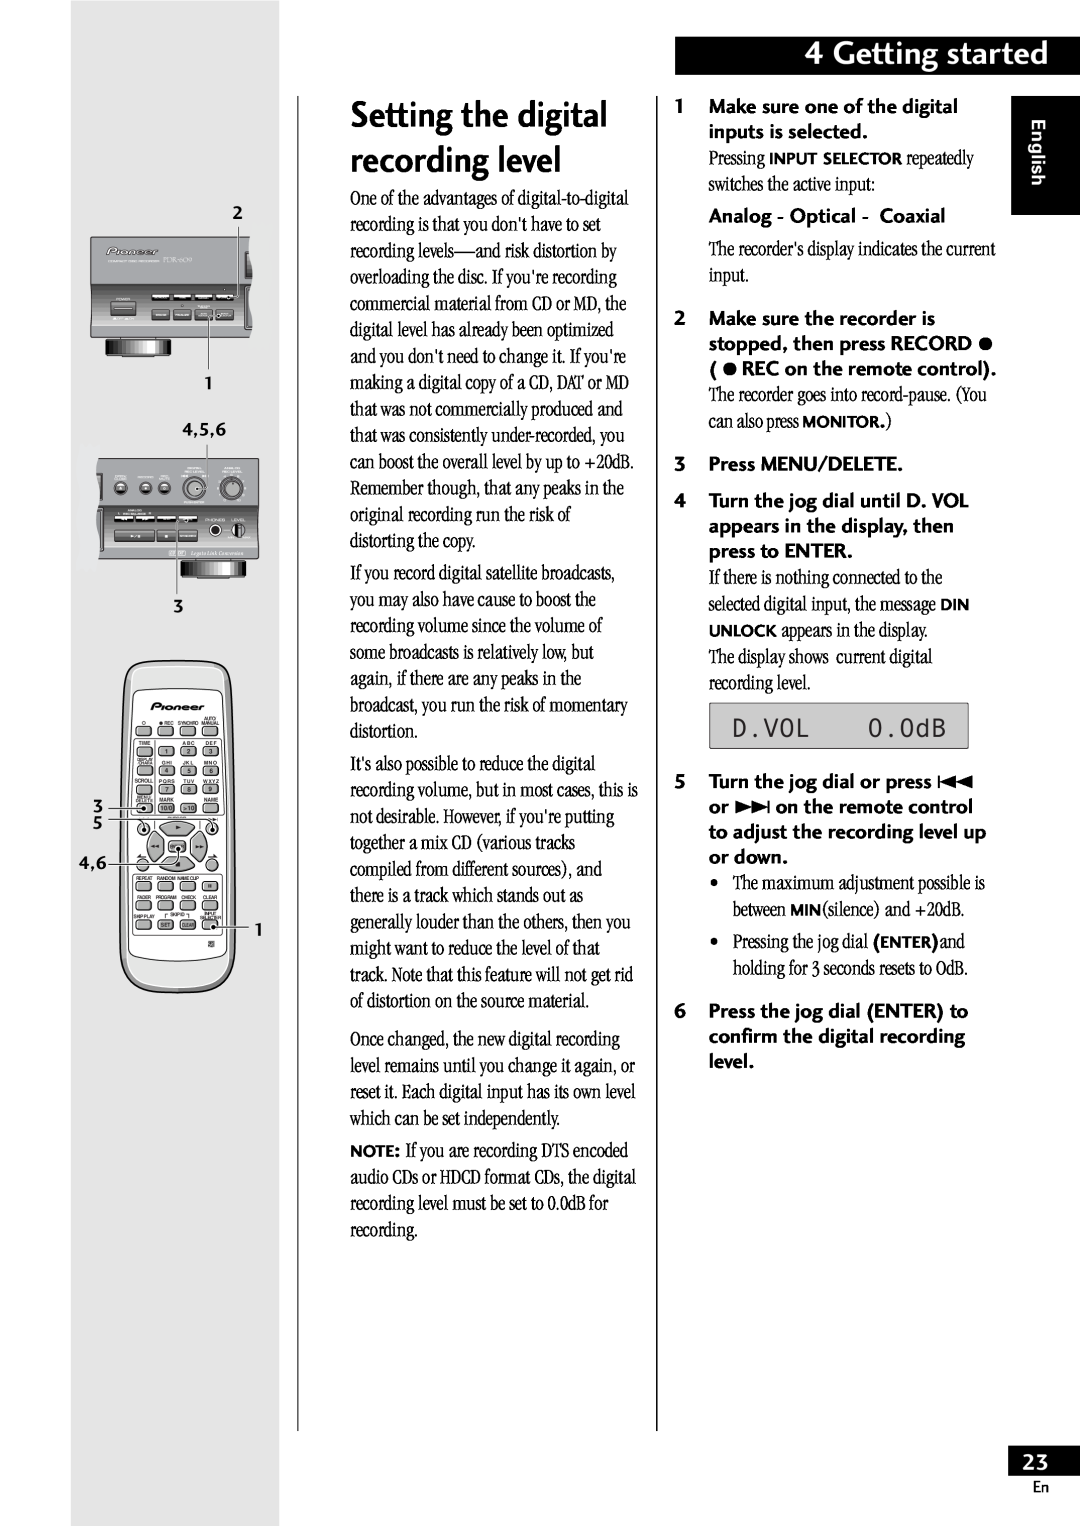 Pioneer PDR-609 operating instructions Setting the digital, recording level, Getting started, English, 1 4,5,6 